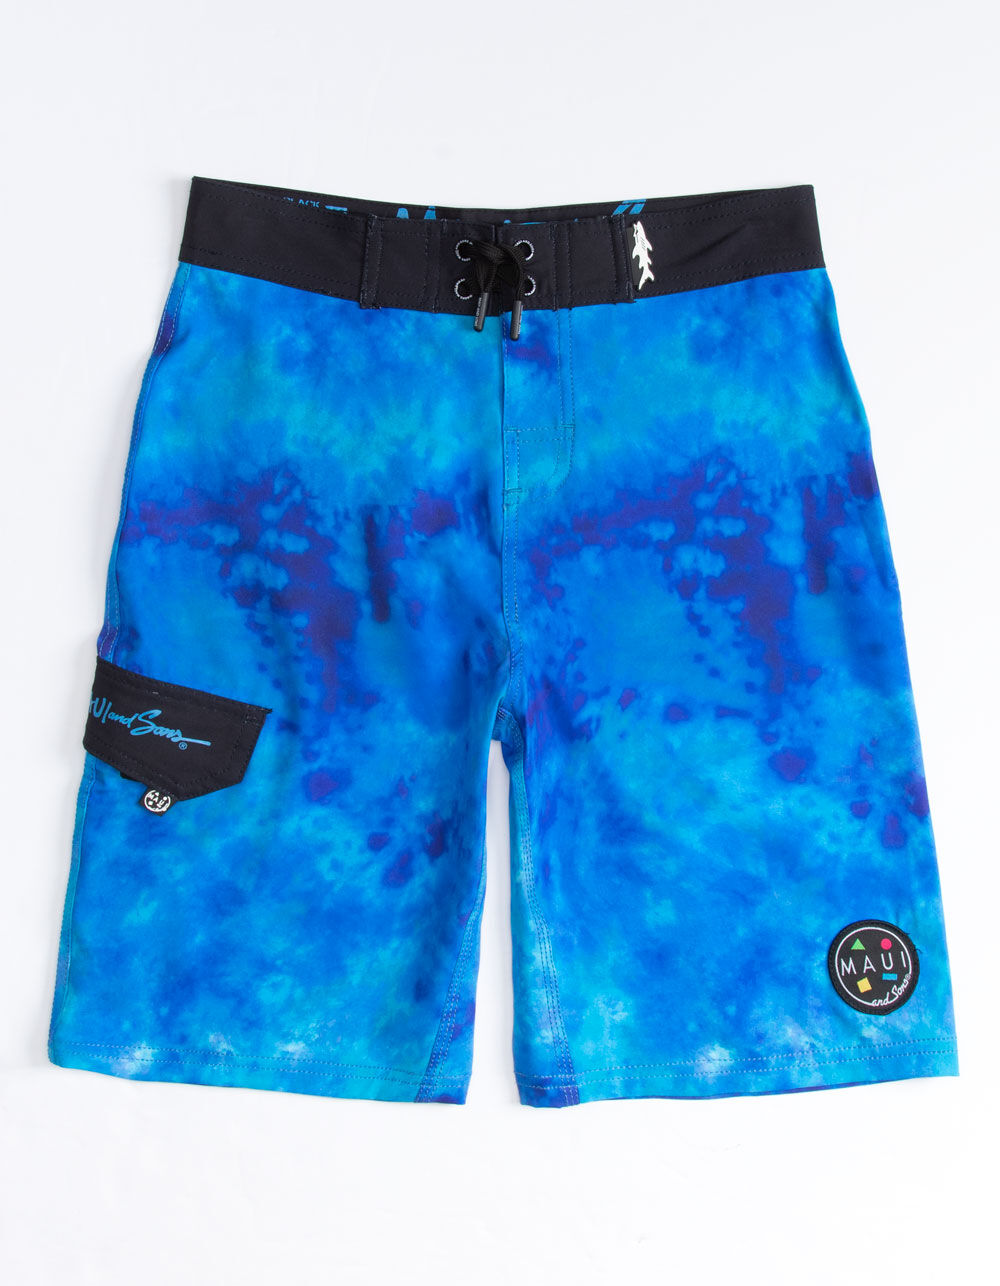 MAUI AND SONS Watercolor Boys Boardshorts - BLUE COMBO | Tillys